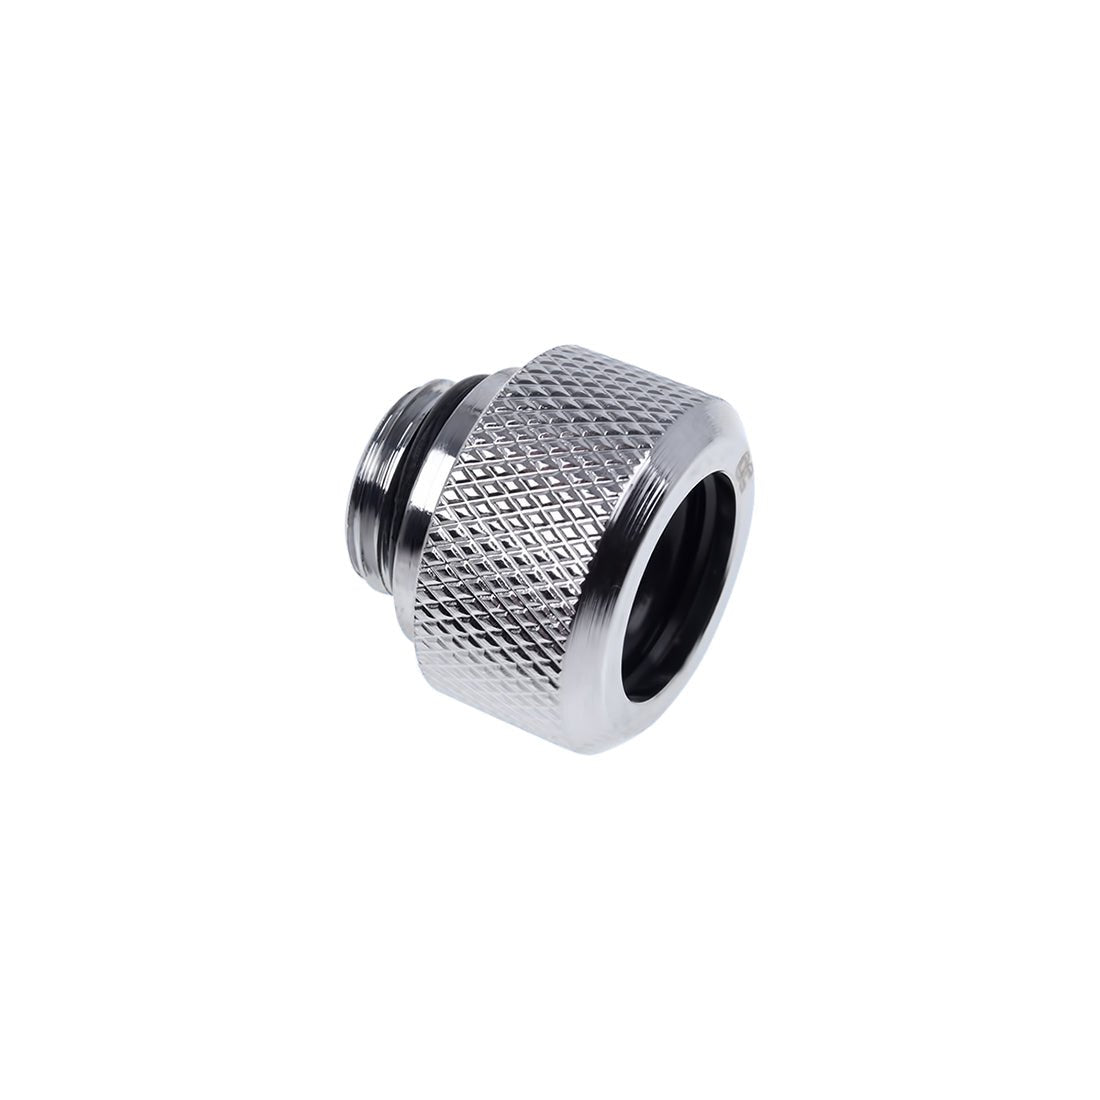 Alphacool Eiszapfen 13mm HardTube compression fitting G1/4 - knurled - Chrome - Store 974 | ستور ٩٧٤